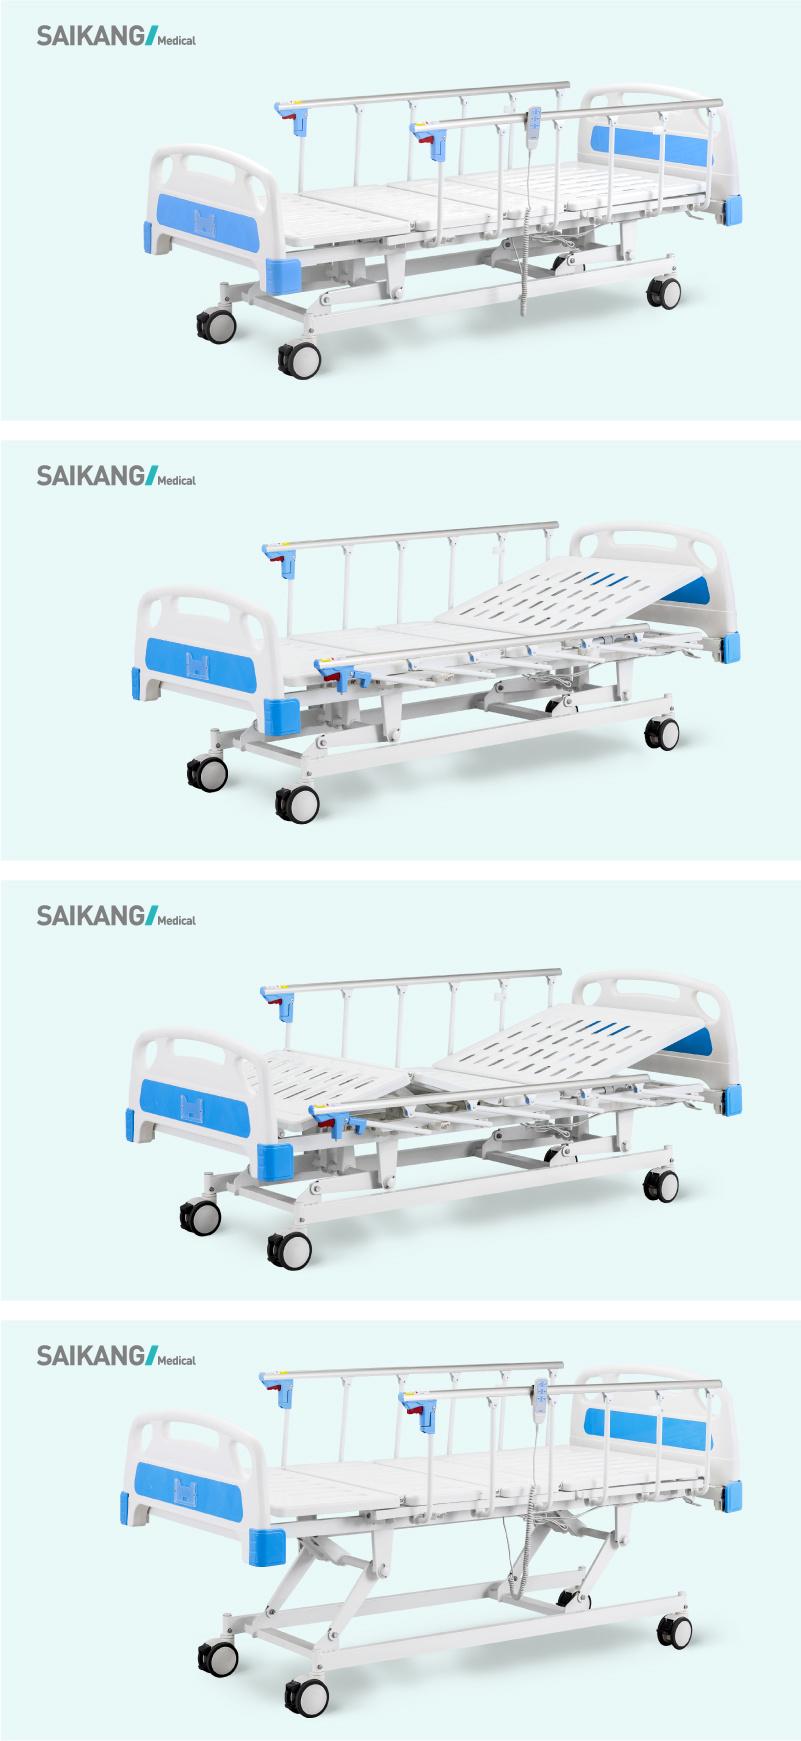 A6w Cheap Morden Medical Electric Adjustable Hospital ICU Patient Care Clinic Bed with Side Rail